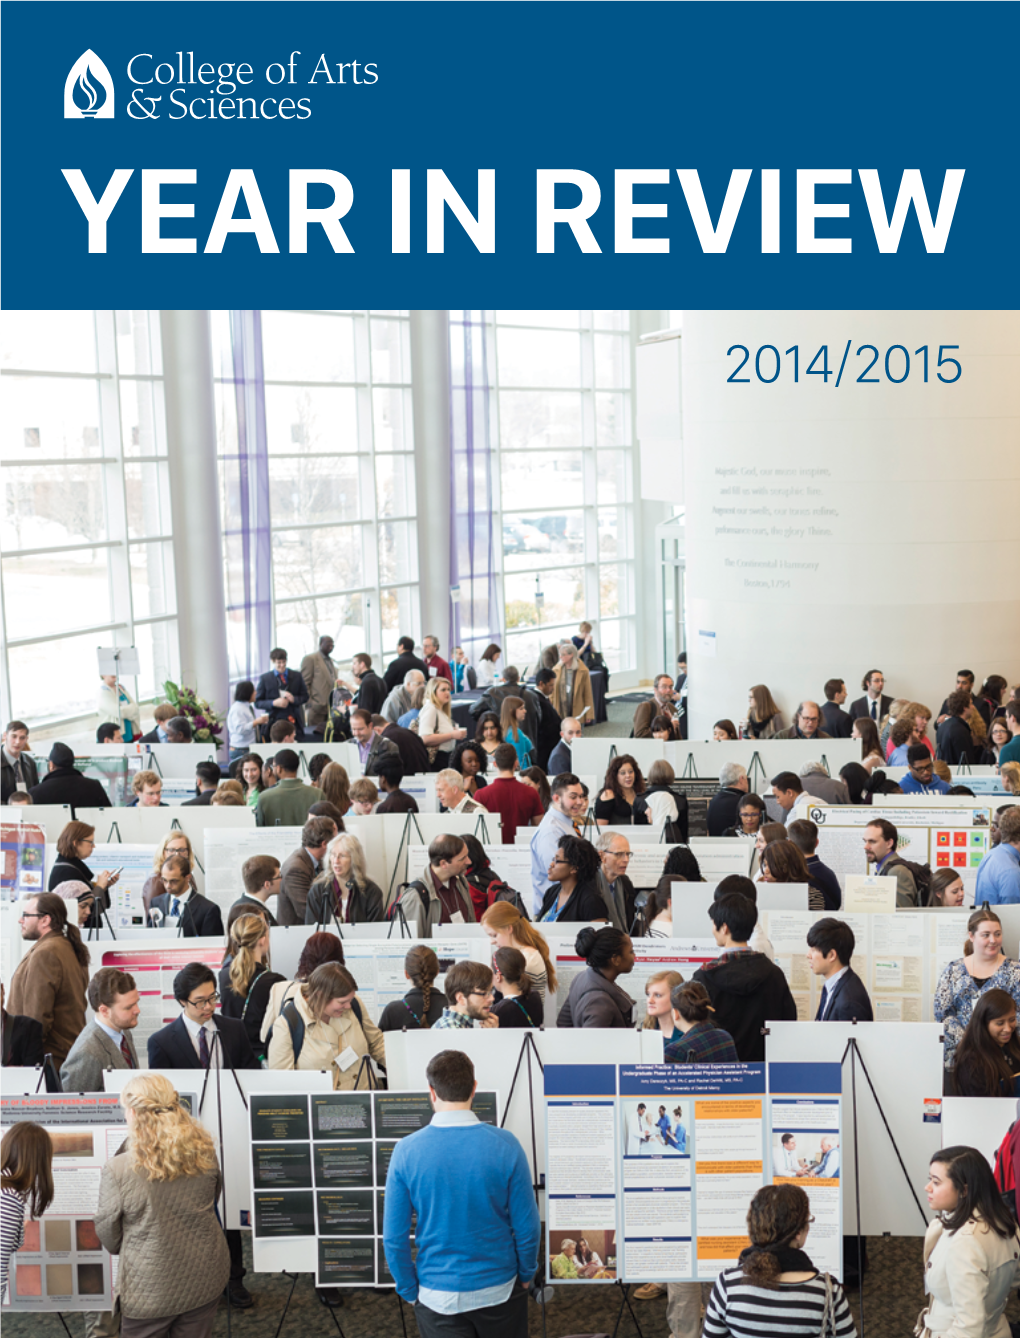 College of Arts & Sciences Year in Review, 2014